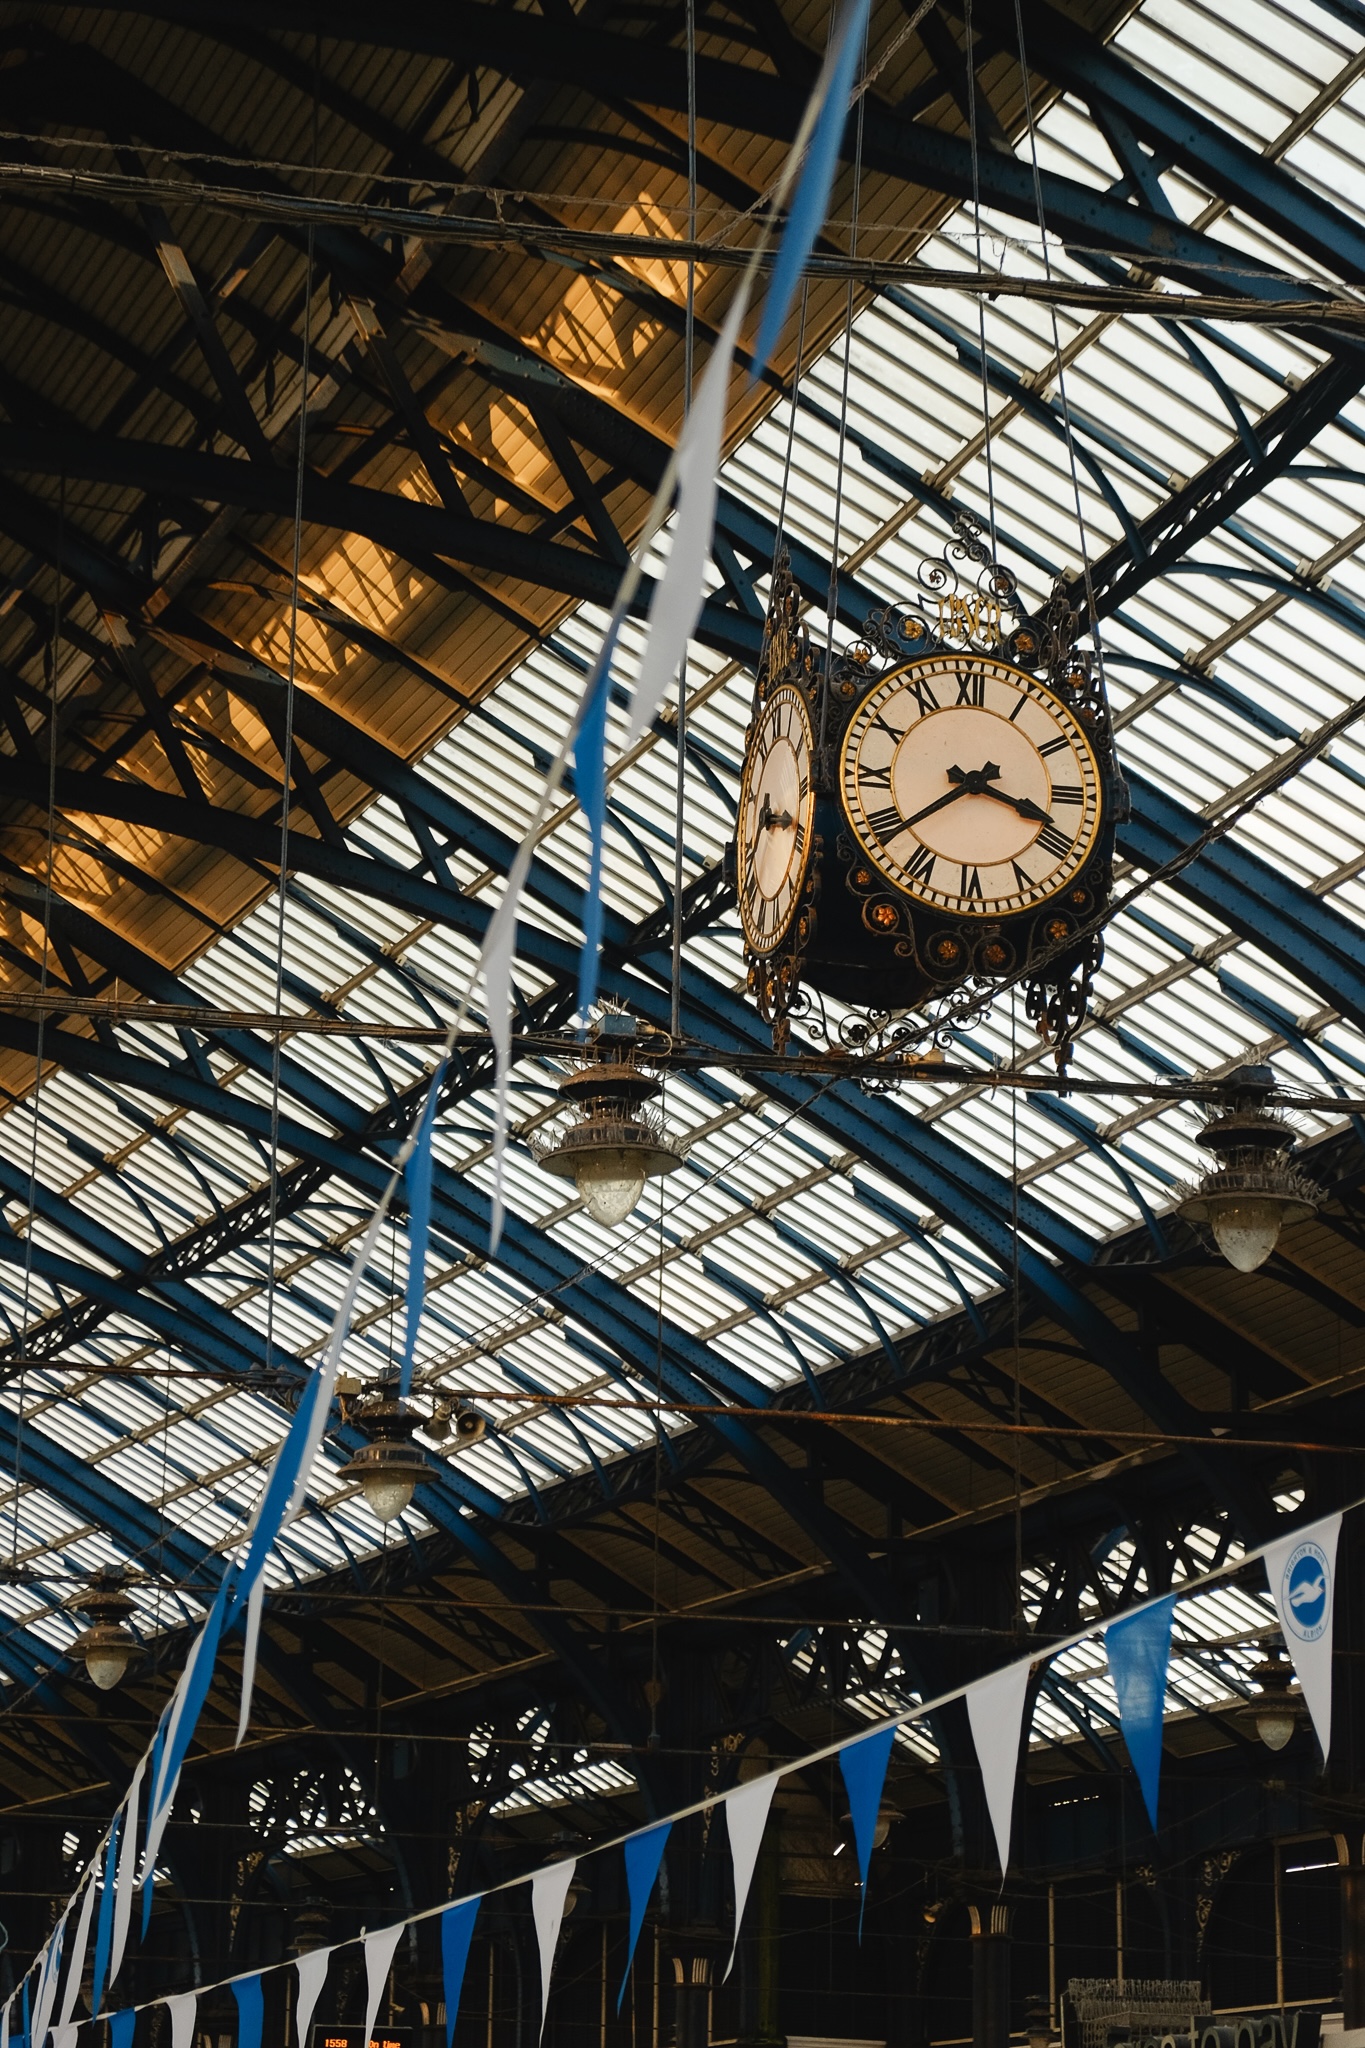 The Brighton train station ornate clock against the steel beams of the enclosing structure with blue and white bunting flags strung across the frame